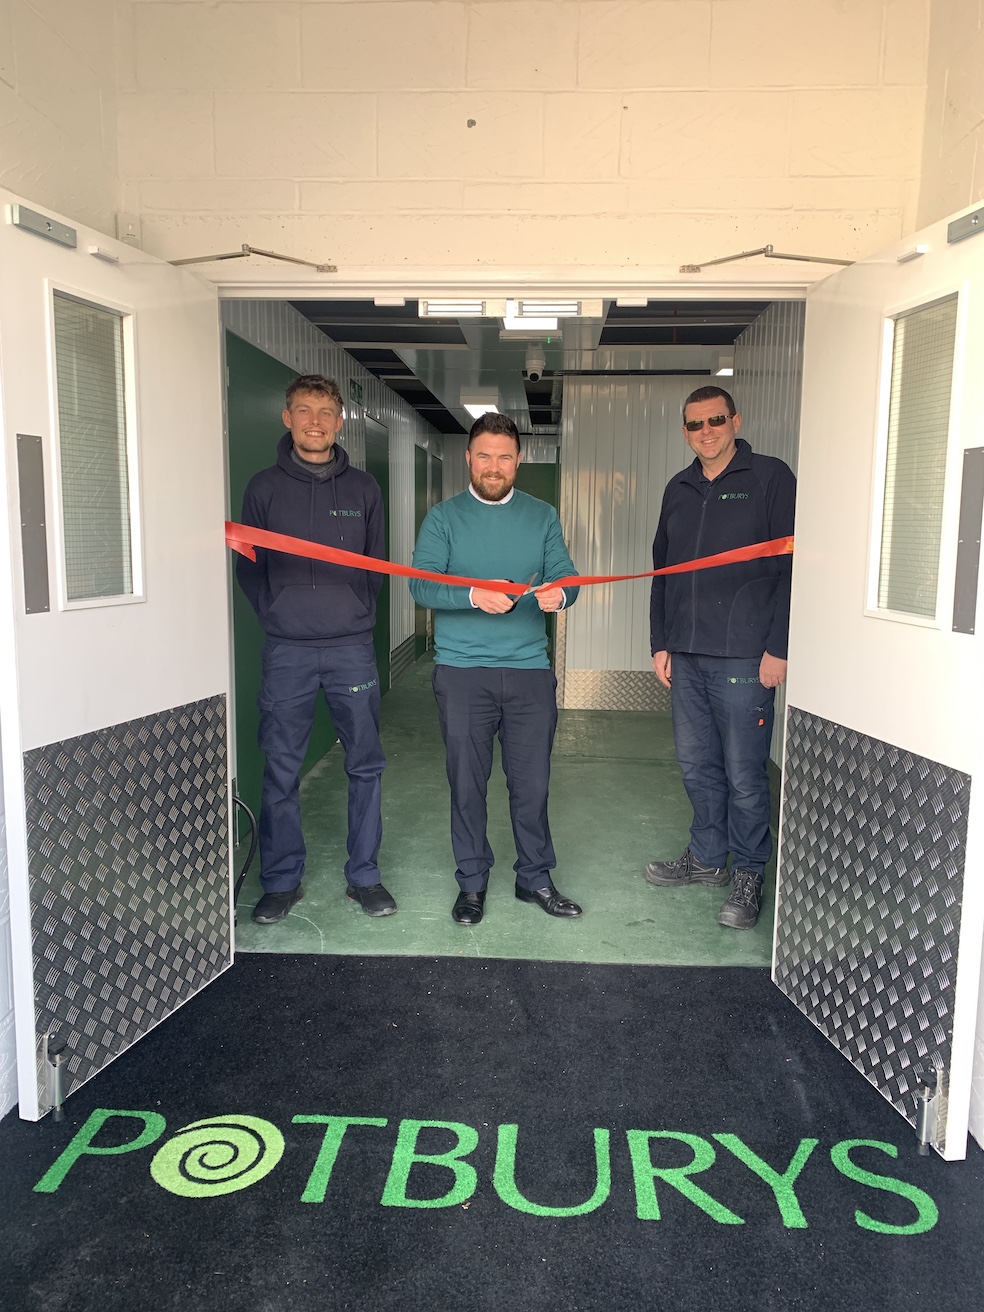 New self-storage facility opens in Sidmouth | The Devon Daily